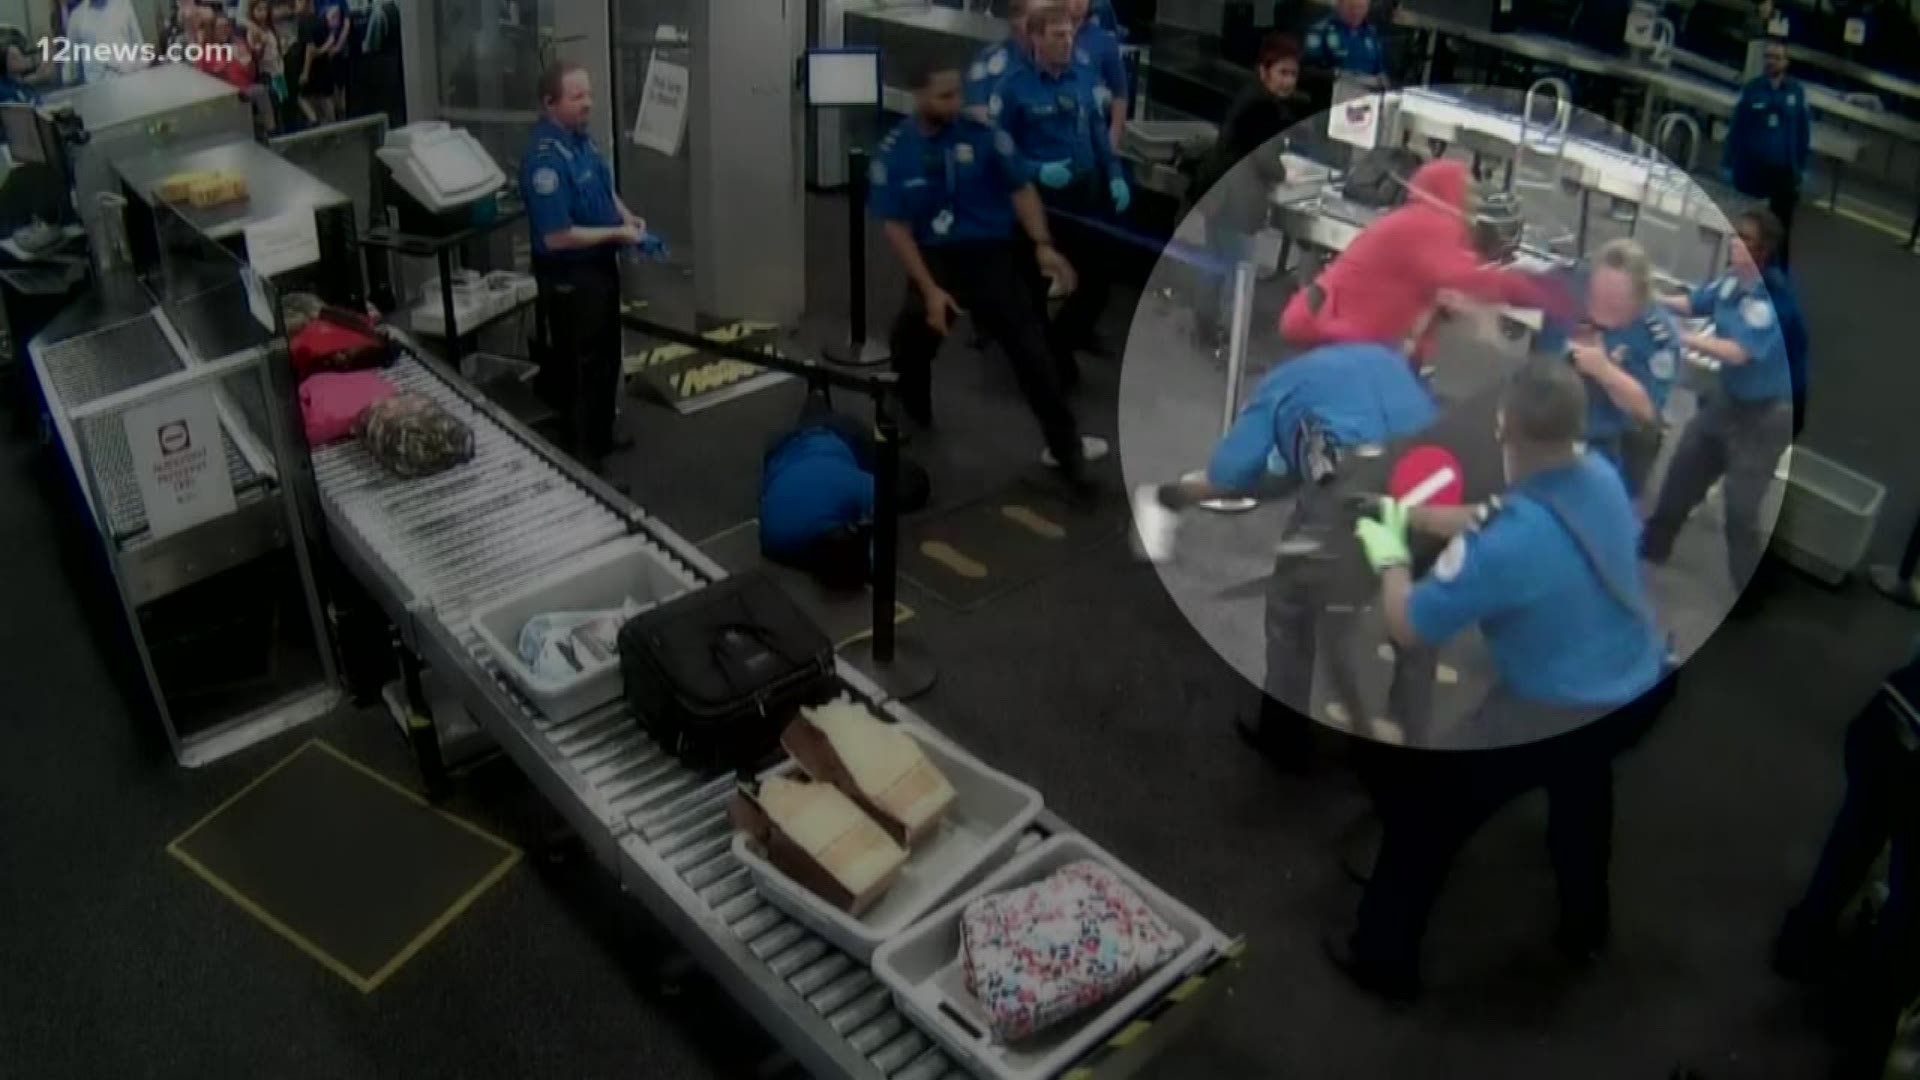 Newly released video shows a man rushing through a security checkpoint and attacking several TSA officers. The union representing TSA says the airport needs better protection.